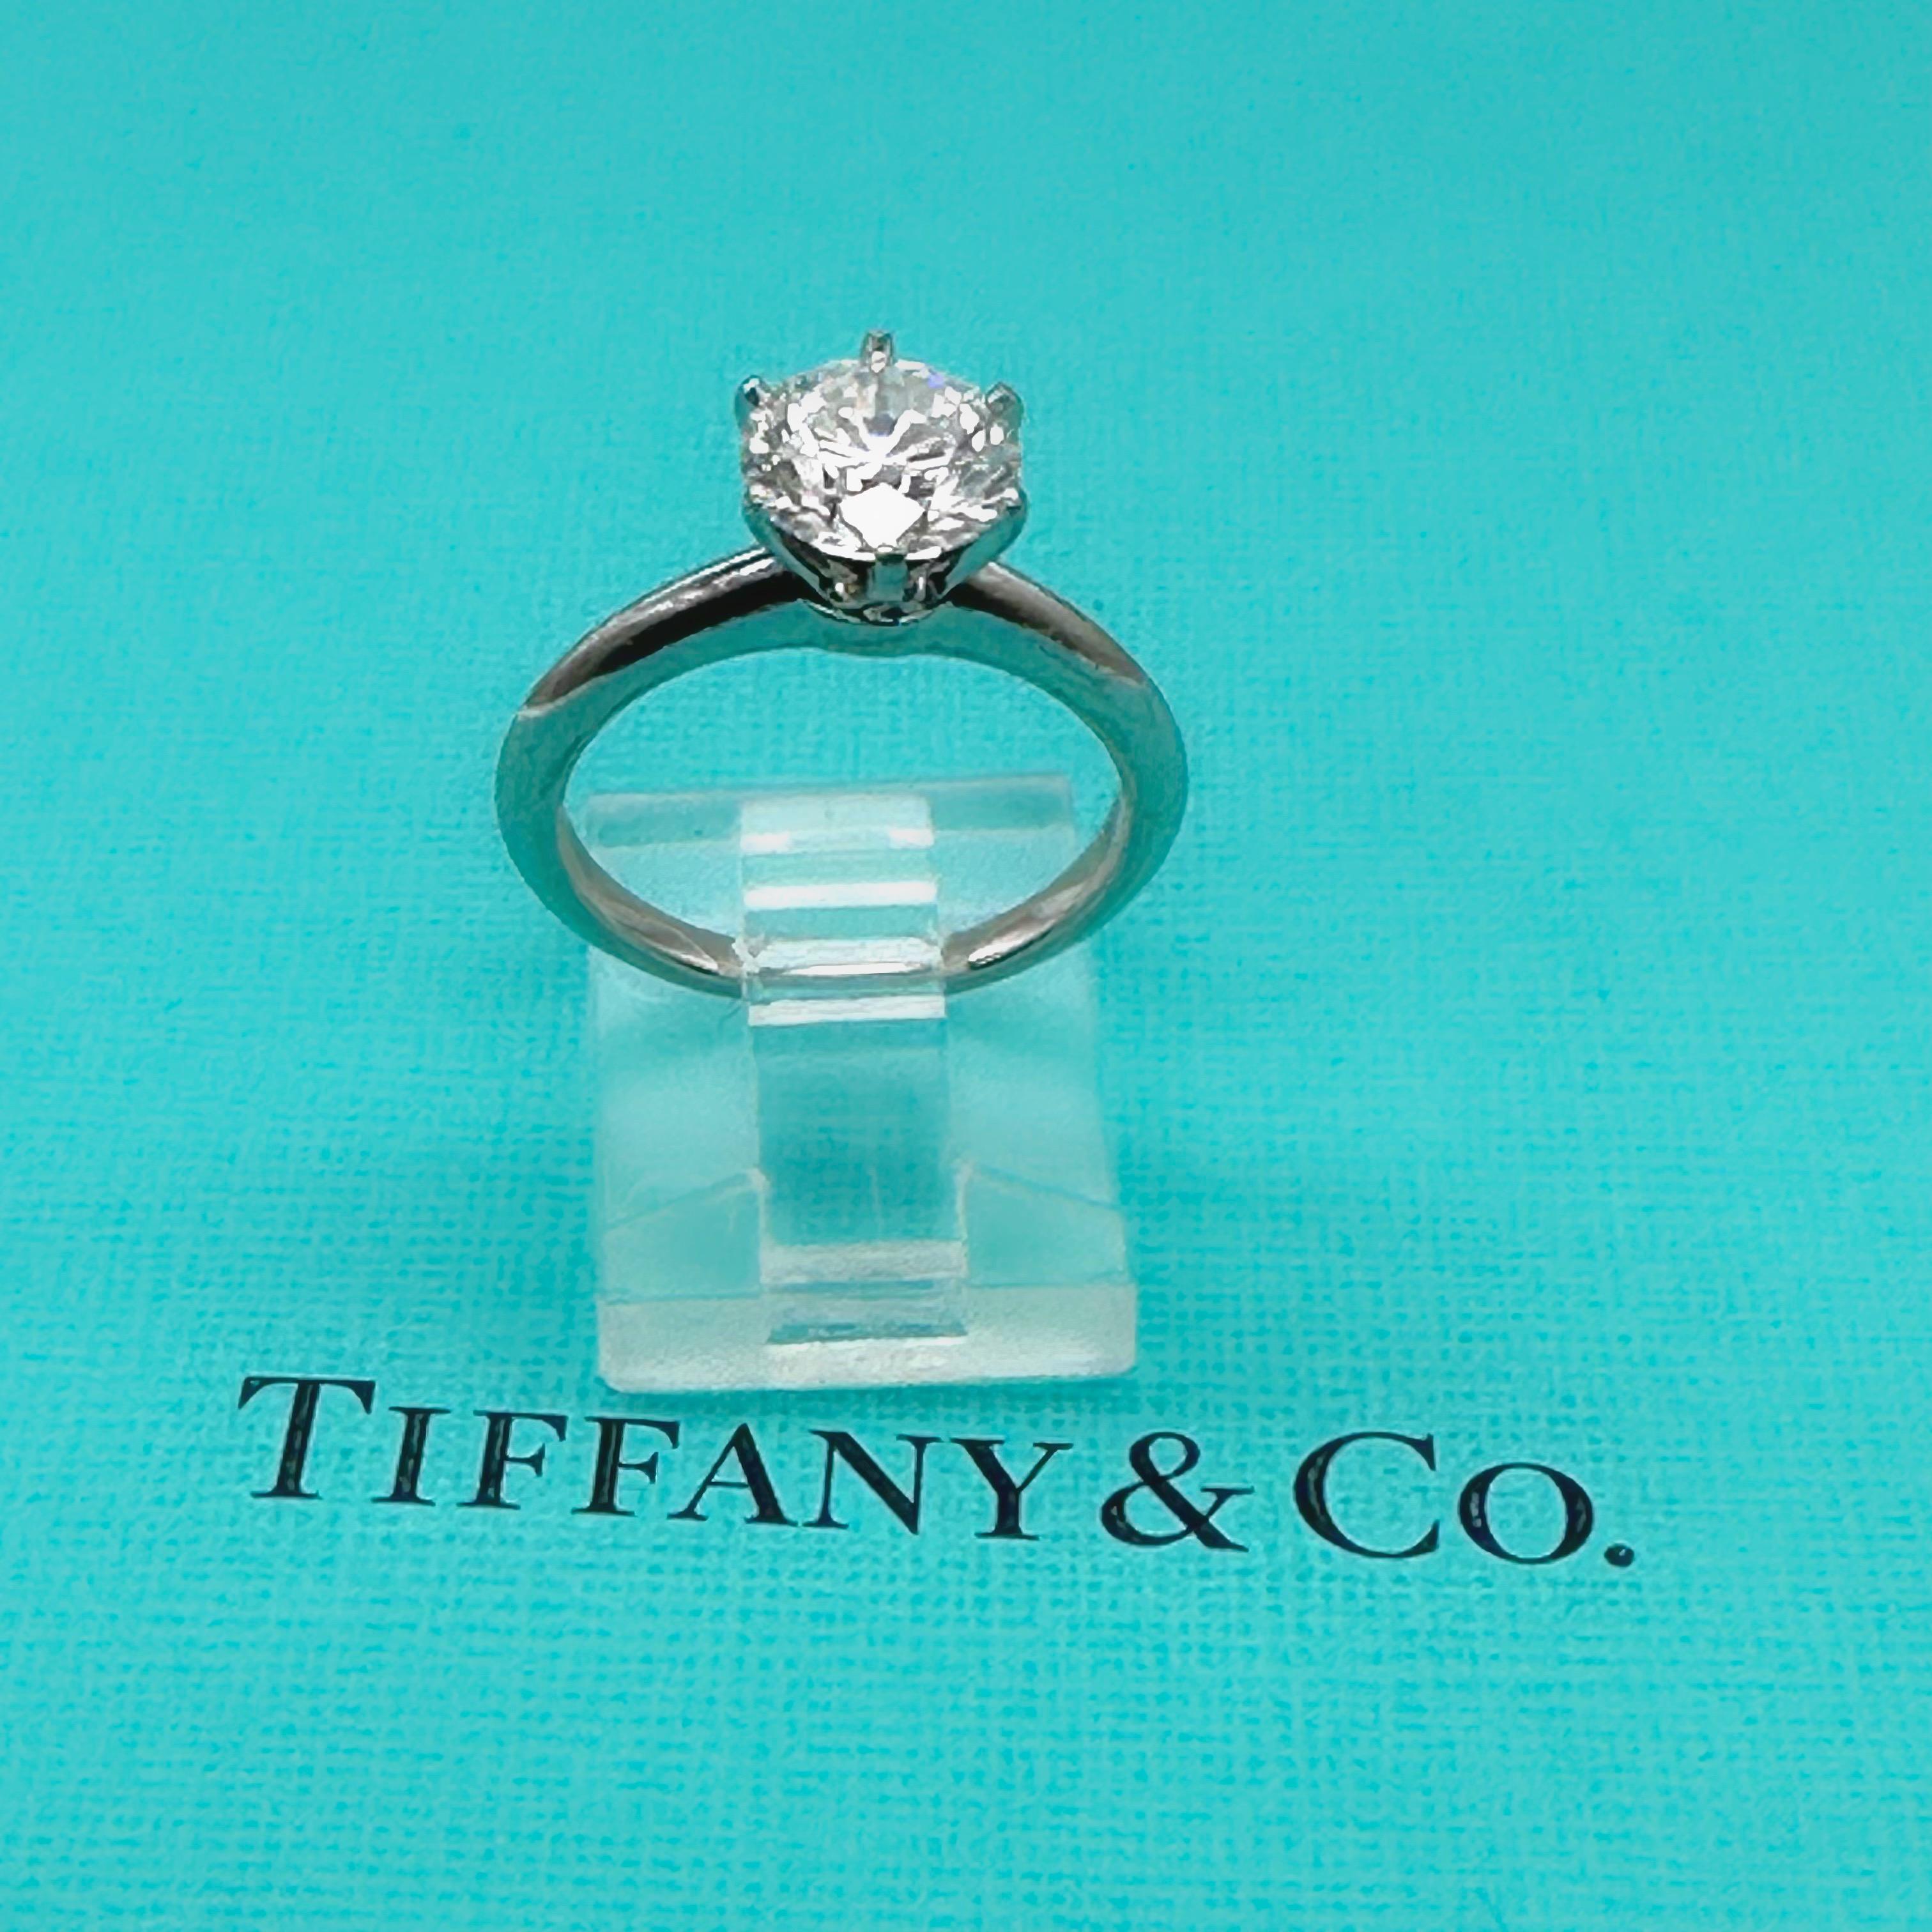 Tiffany & Co. Round Diamond 1.85cts E VS1 Solitaire Engagement Ring Platinum For Sale 8